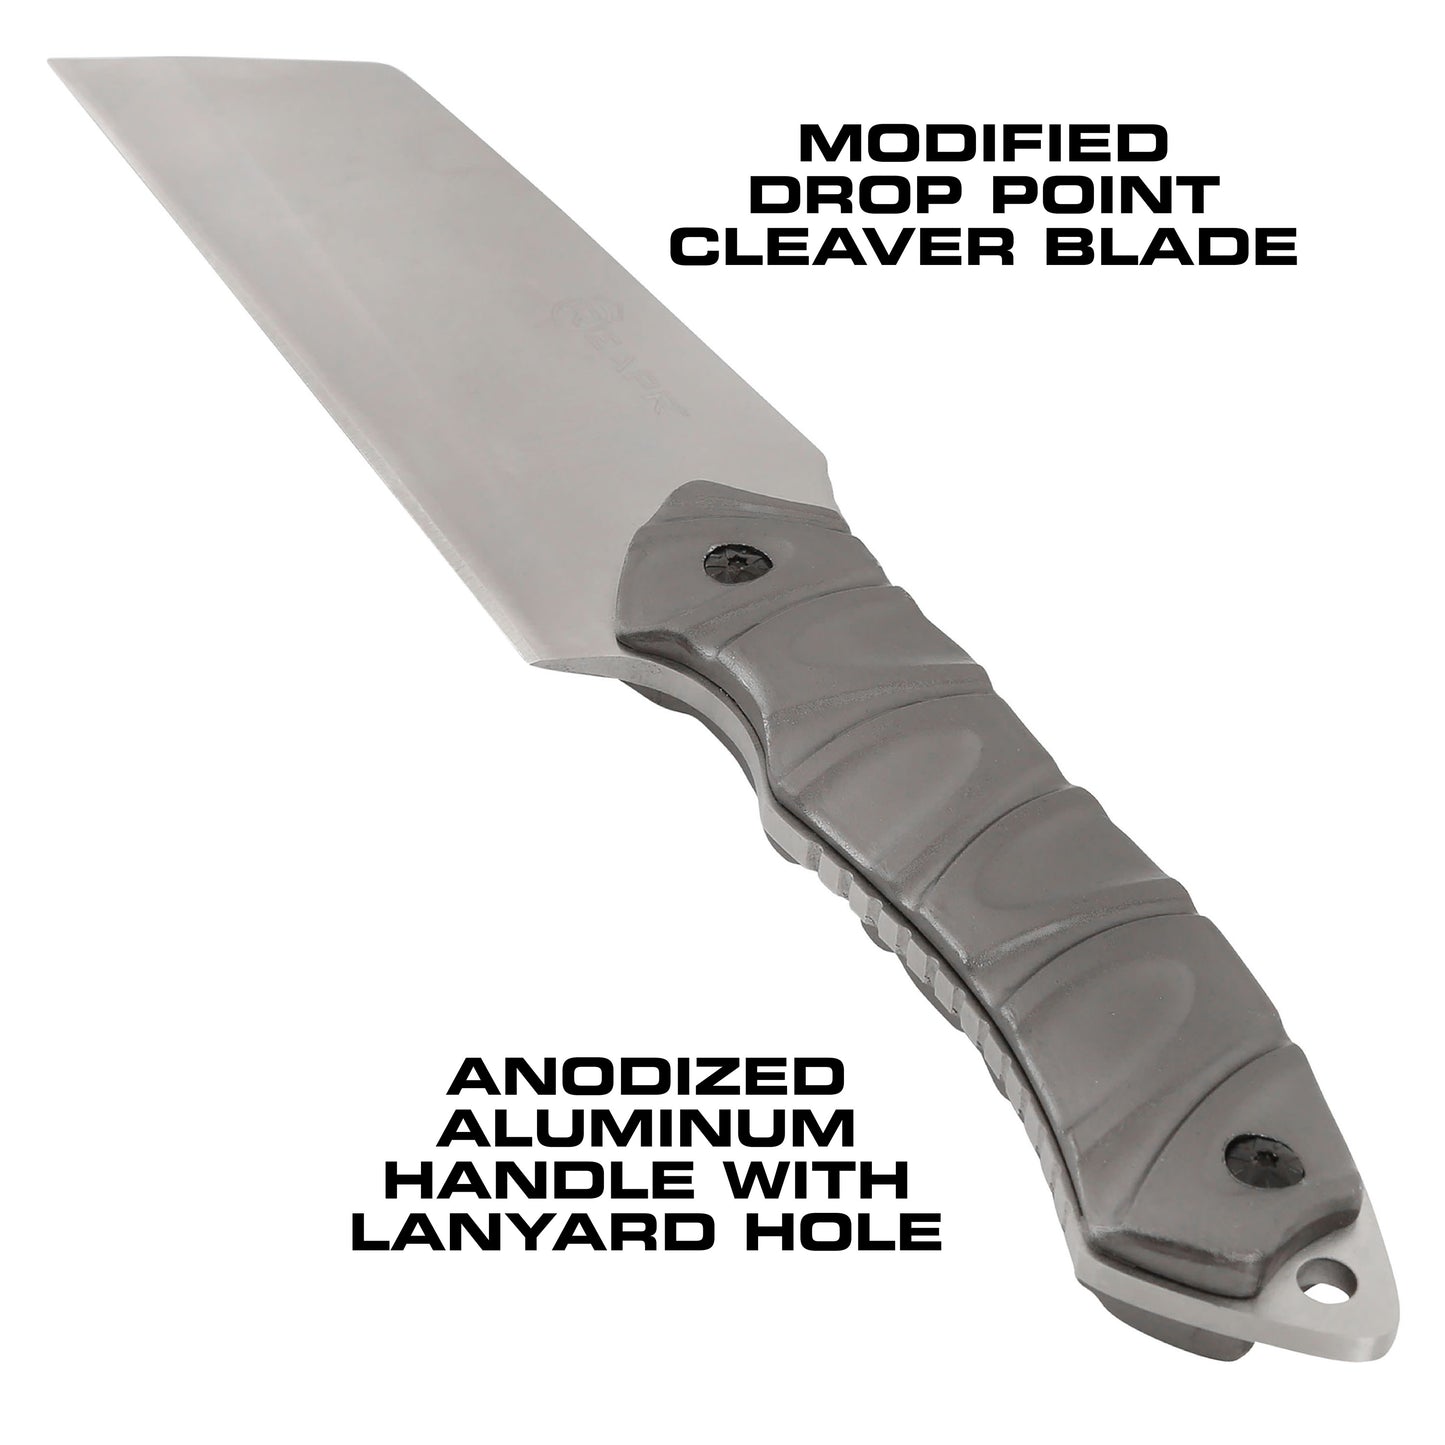 REAPR 11012 JAMR Knife is the ultimate in versatile, tactical fixed-blade knives.